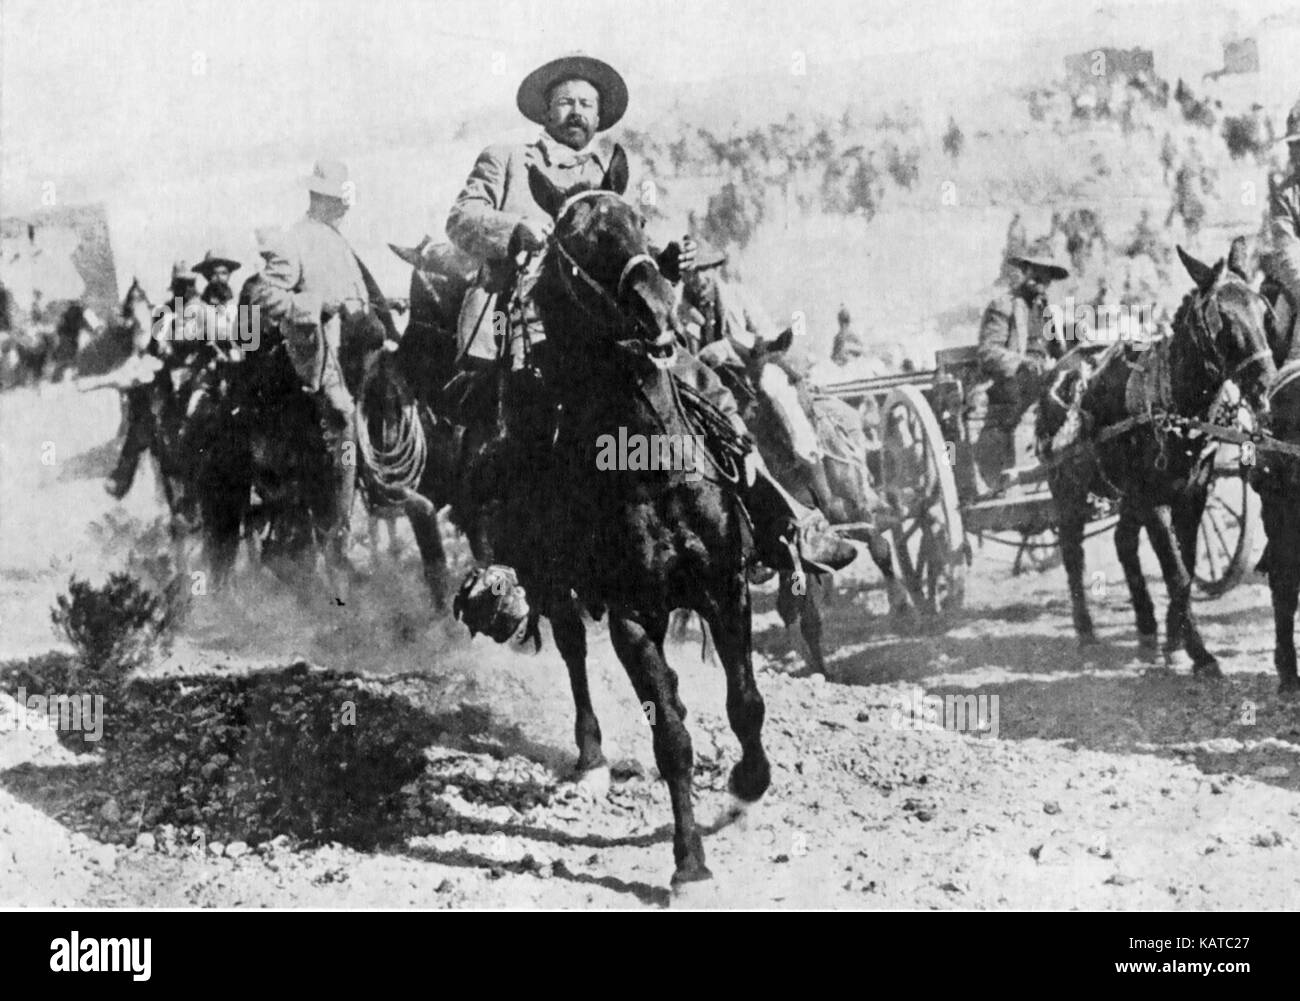 PANCHO VILLA (1878-1923) Mexican revolutionary entering the town of Ojinaga. Photo  taken by Mutual Film Corporation photographer John Wheelan  in January 1914 to promote their silent film The Great Mexican War Stock Photo